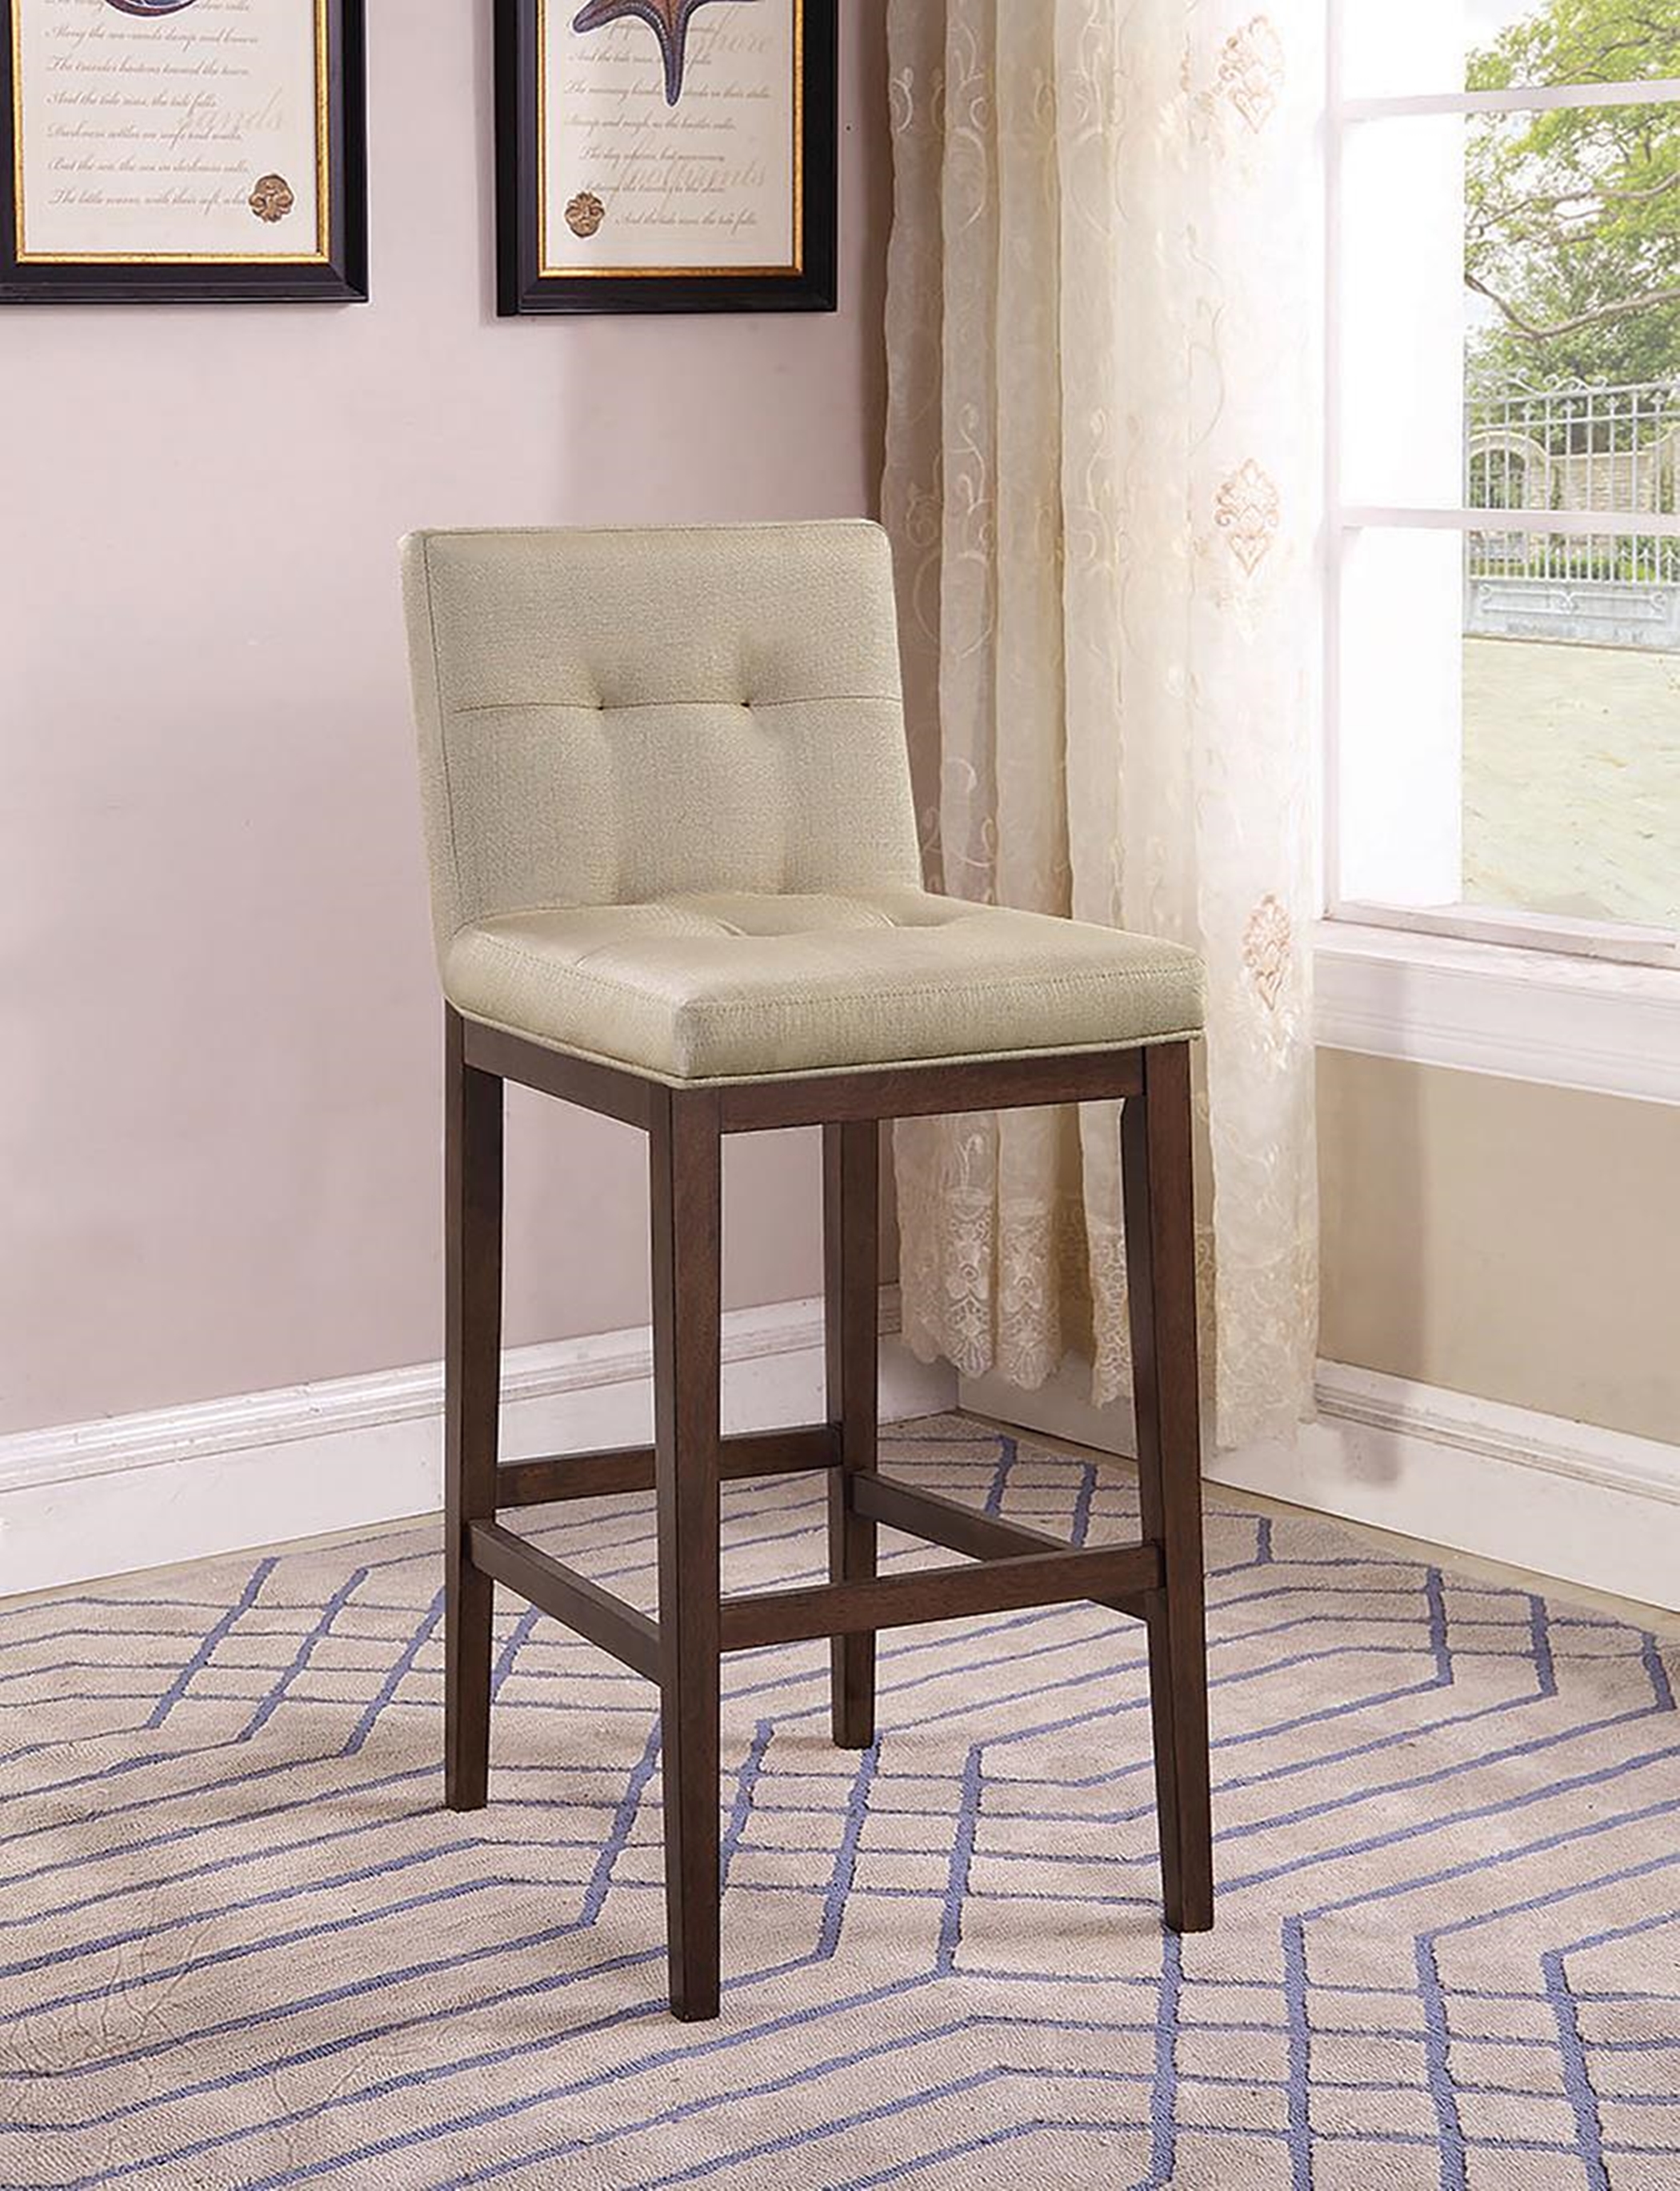 Transitional Beige and Capp. Bar-Height Stool - Click Image to Close